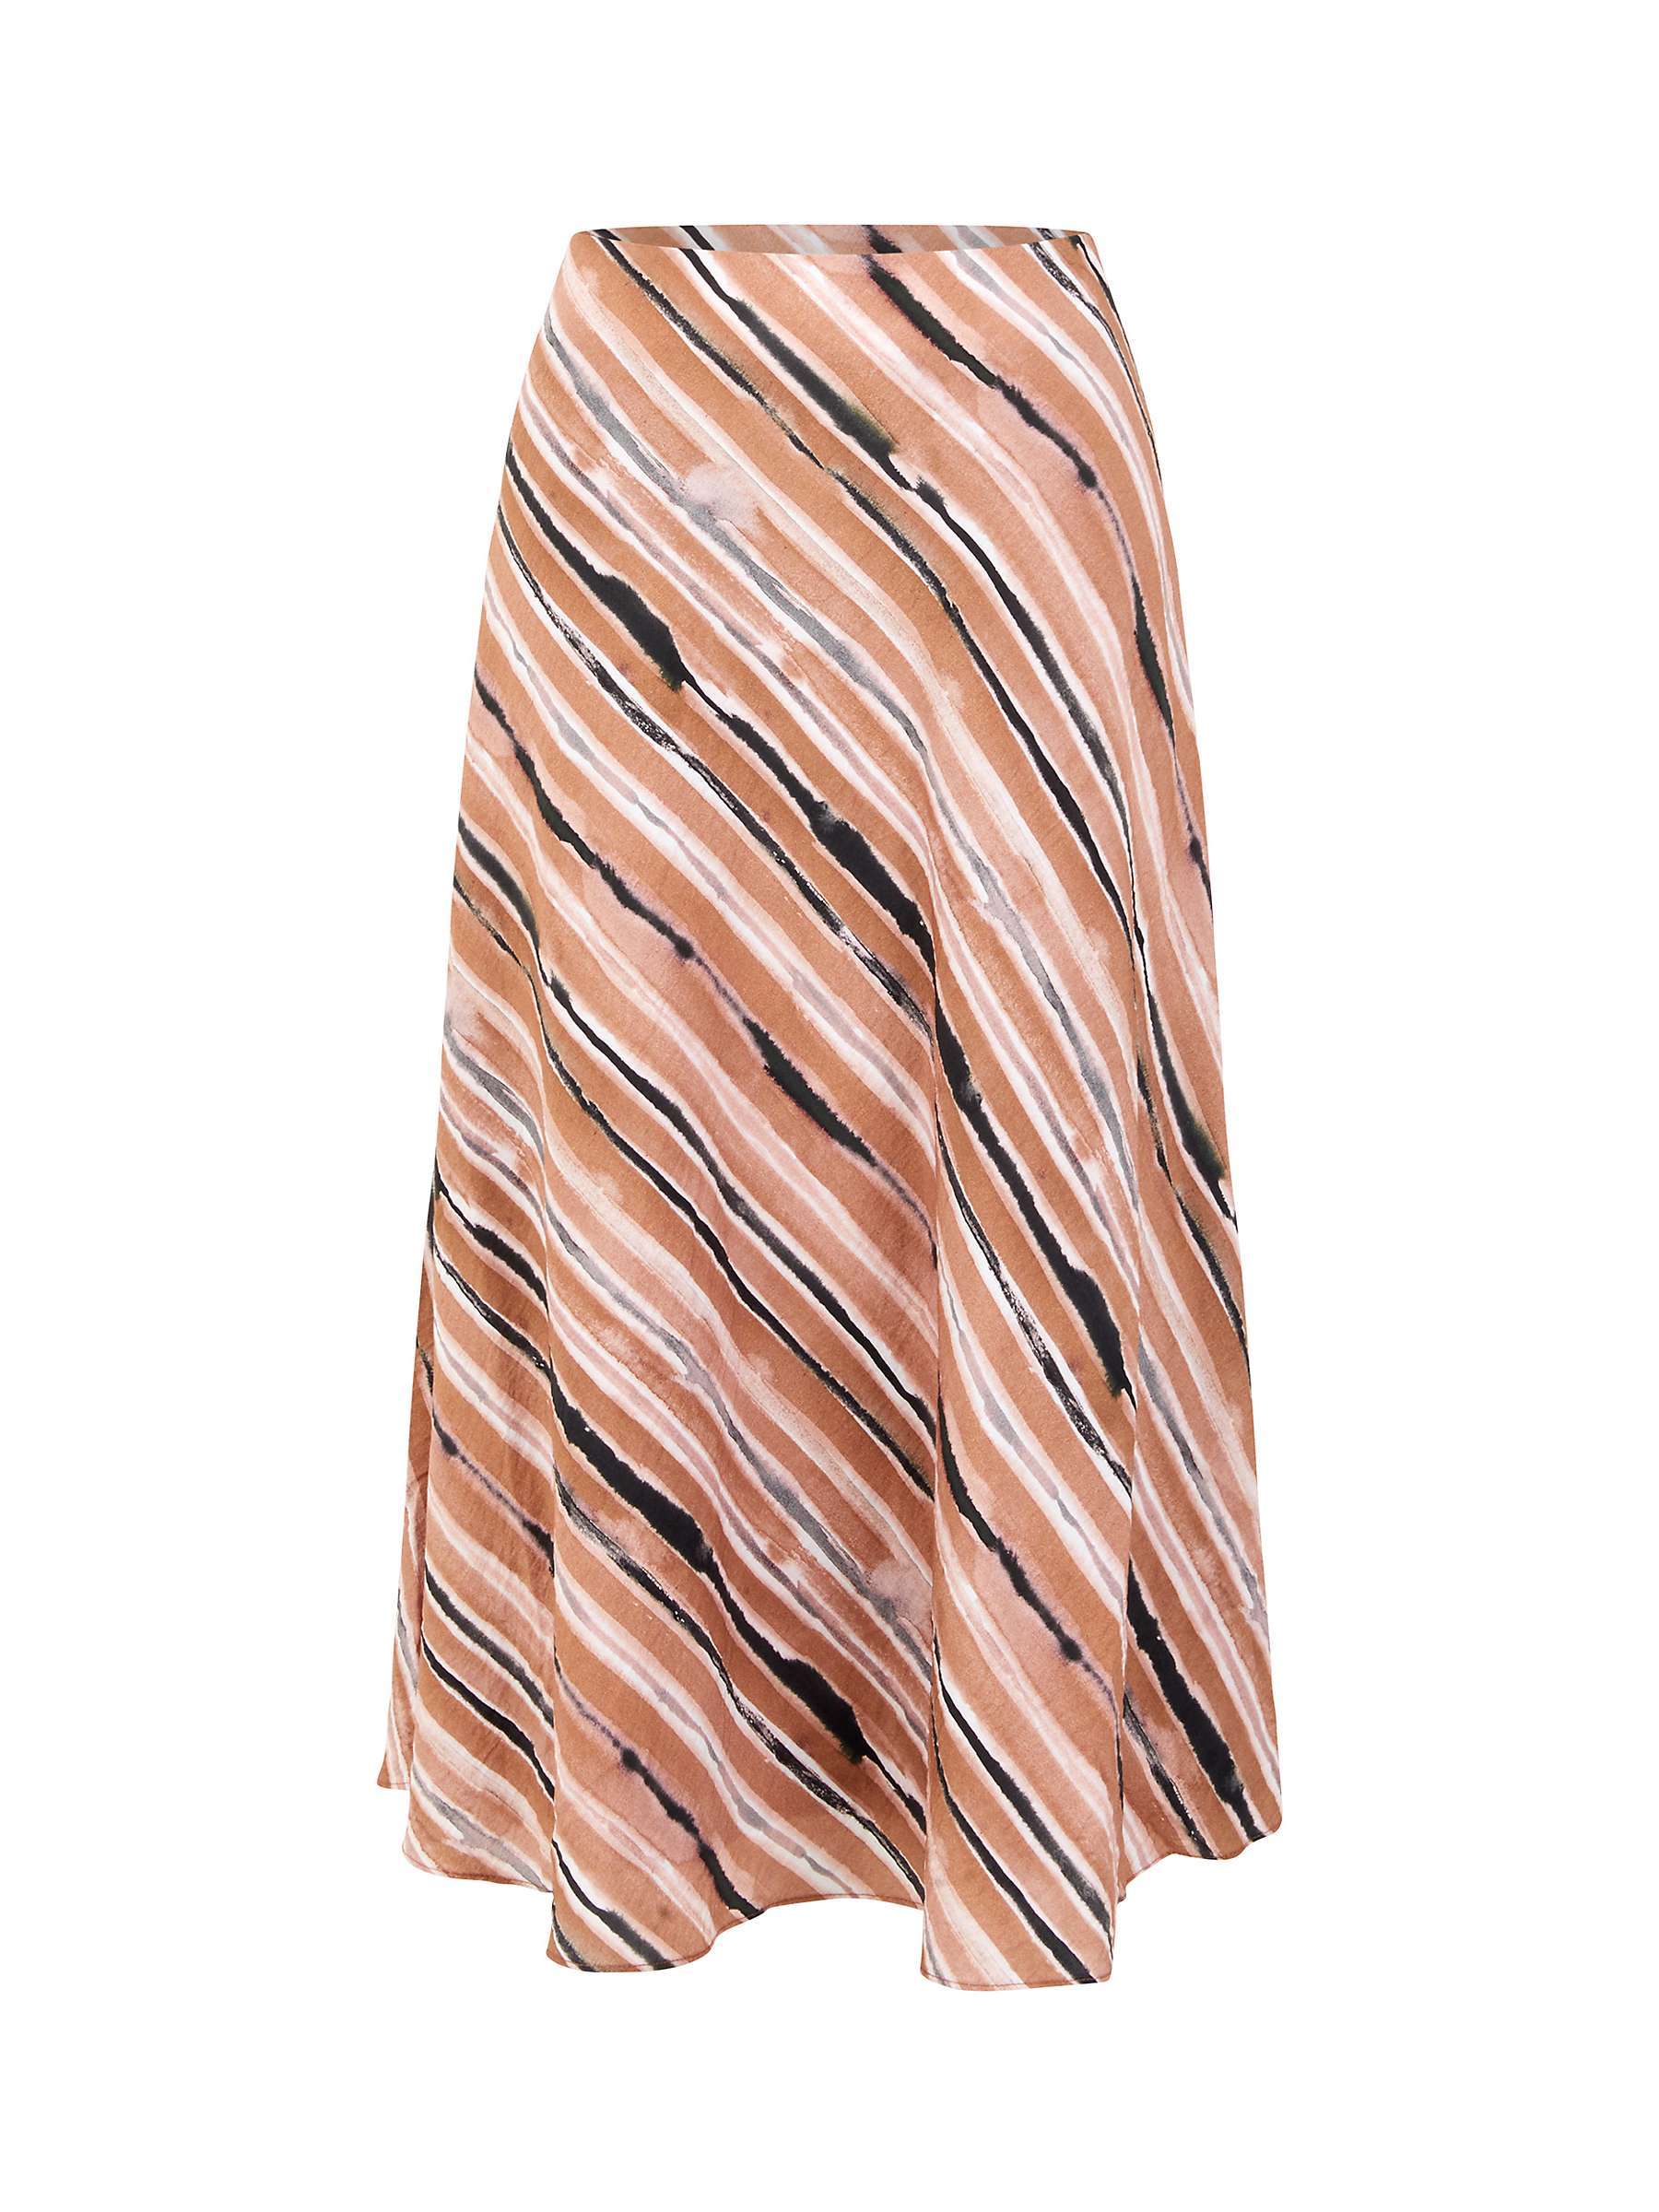 Buy French Connection Gaia Flavia Textured Stripe Midi Skirt, Mocha Mousse Online at johnlewis.com